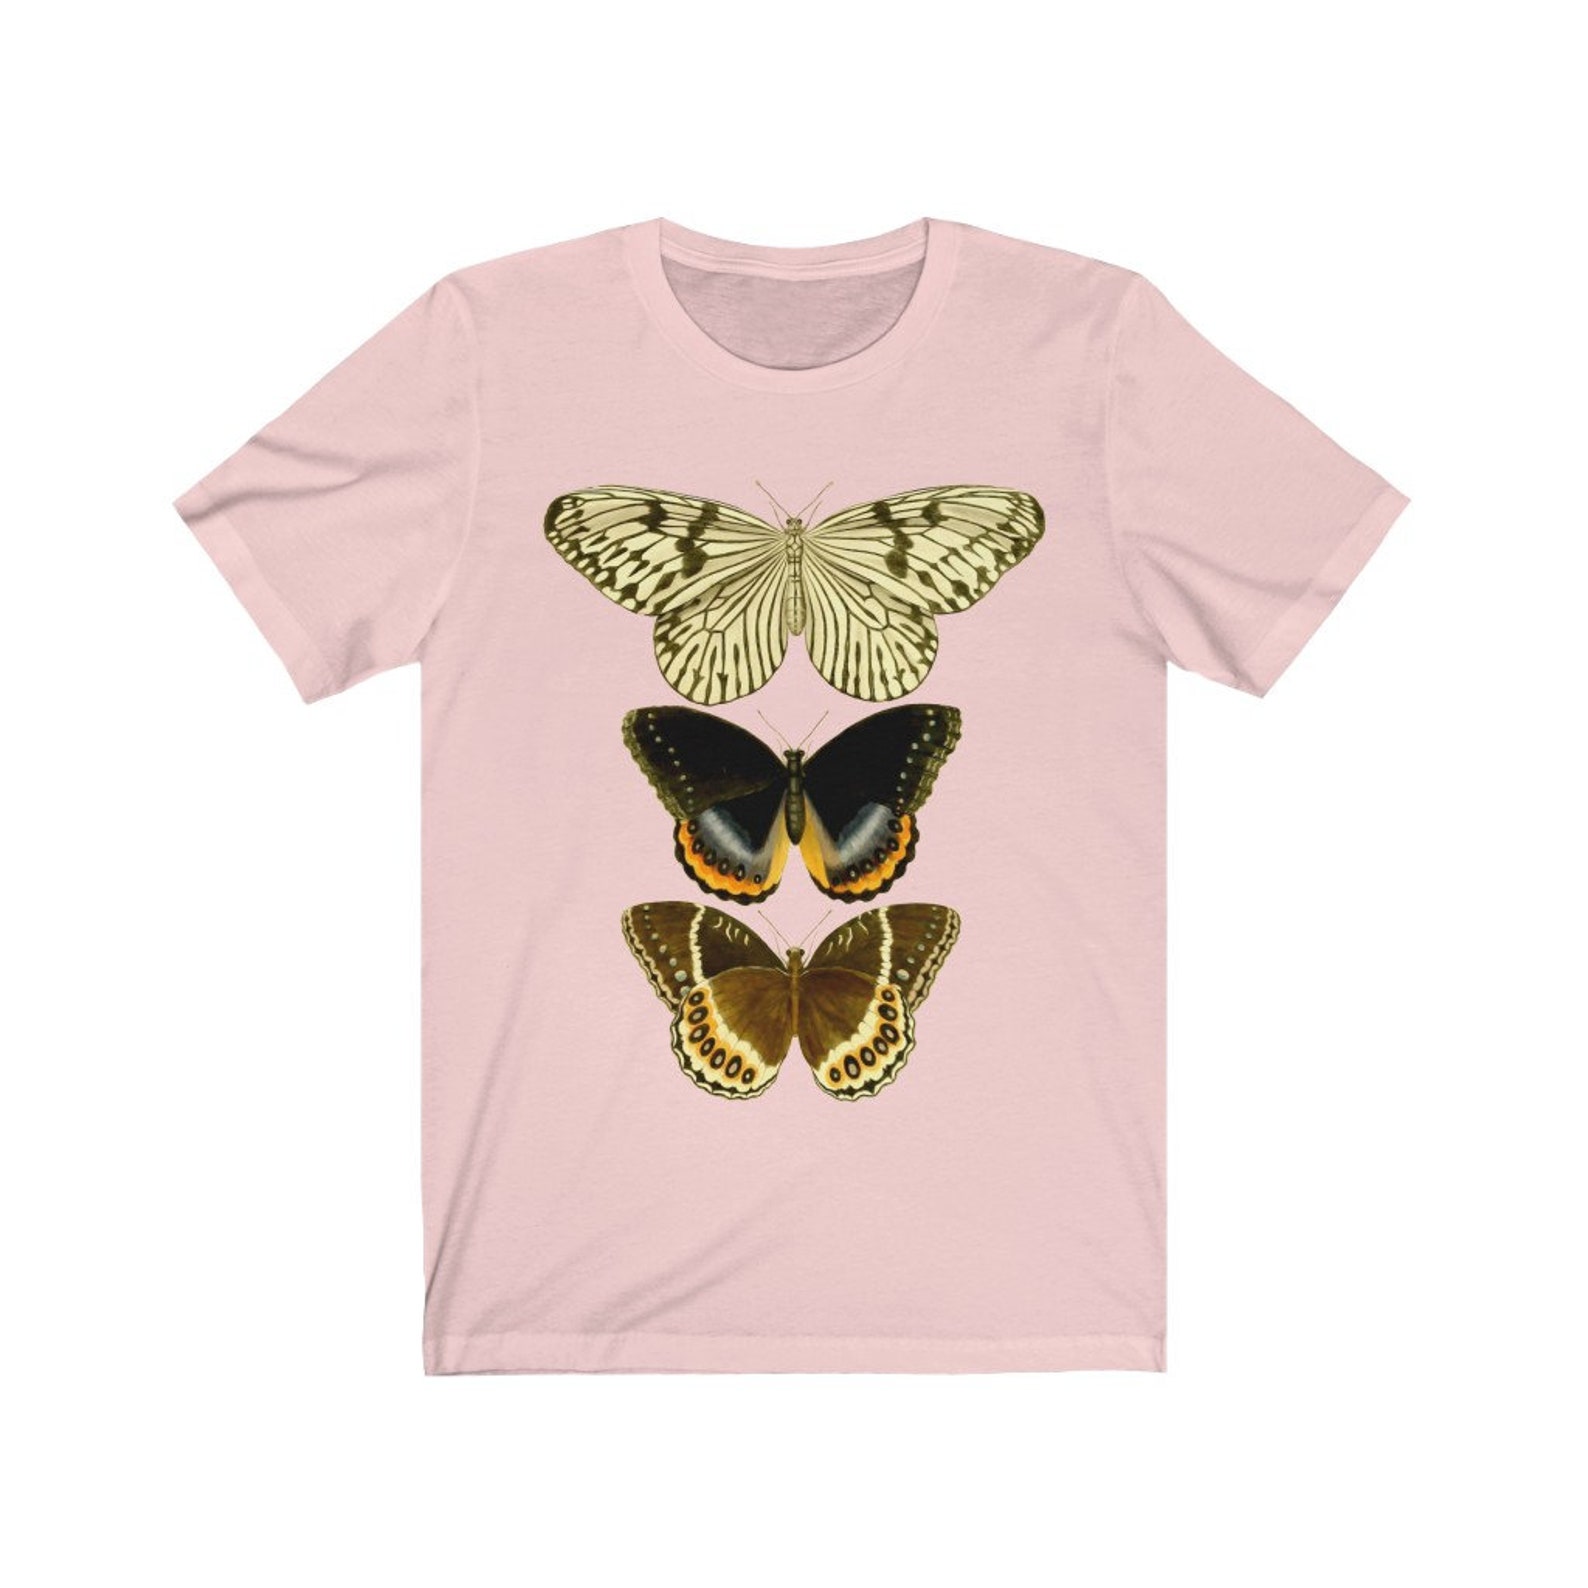 Butterfly T-shirt Graphic Shirt Printed T-shirt Vintage - Etsy